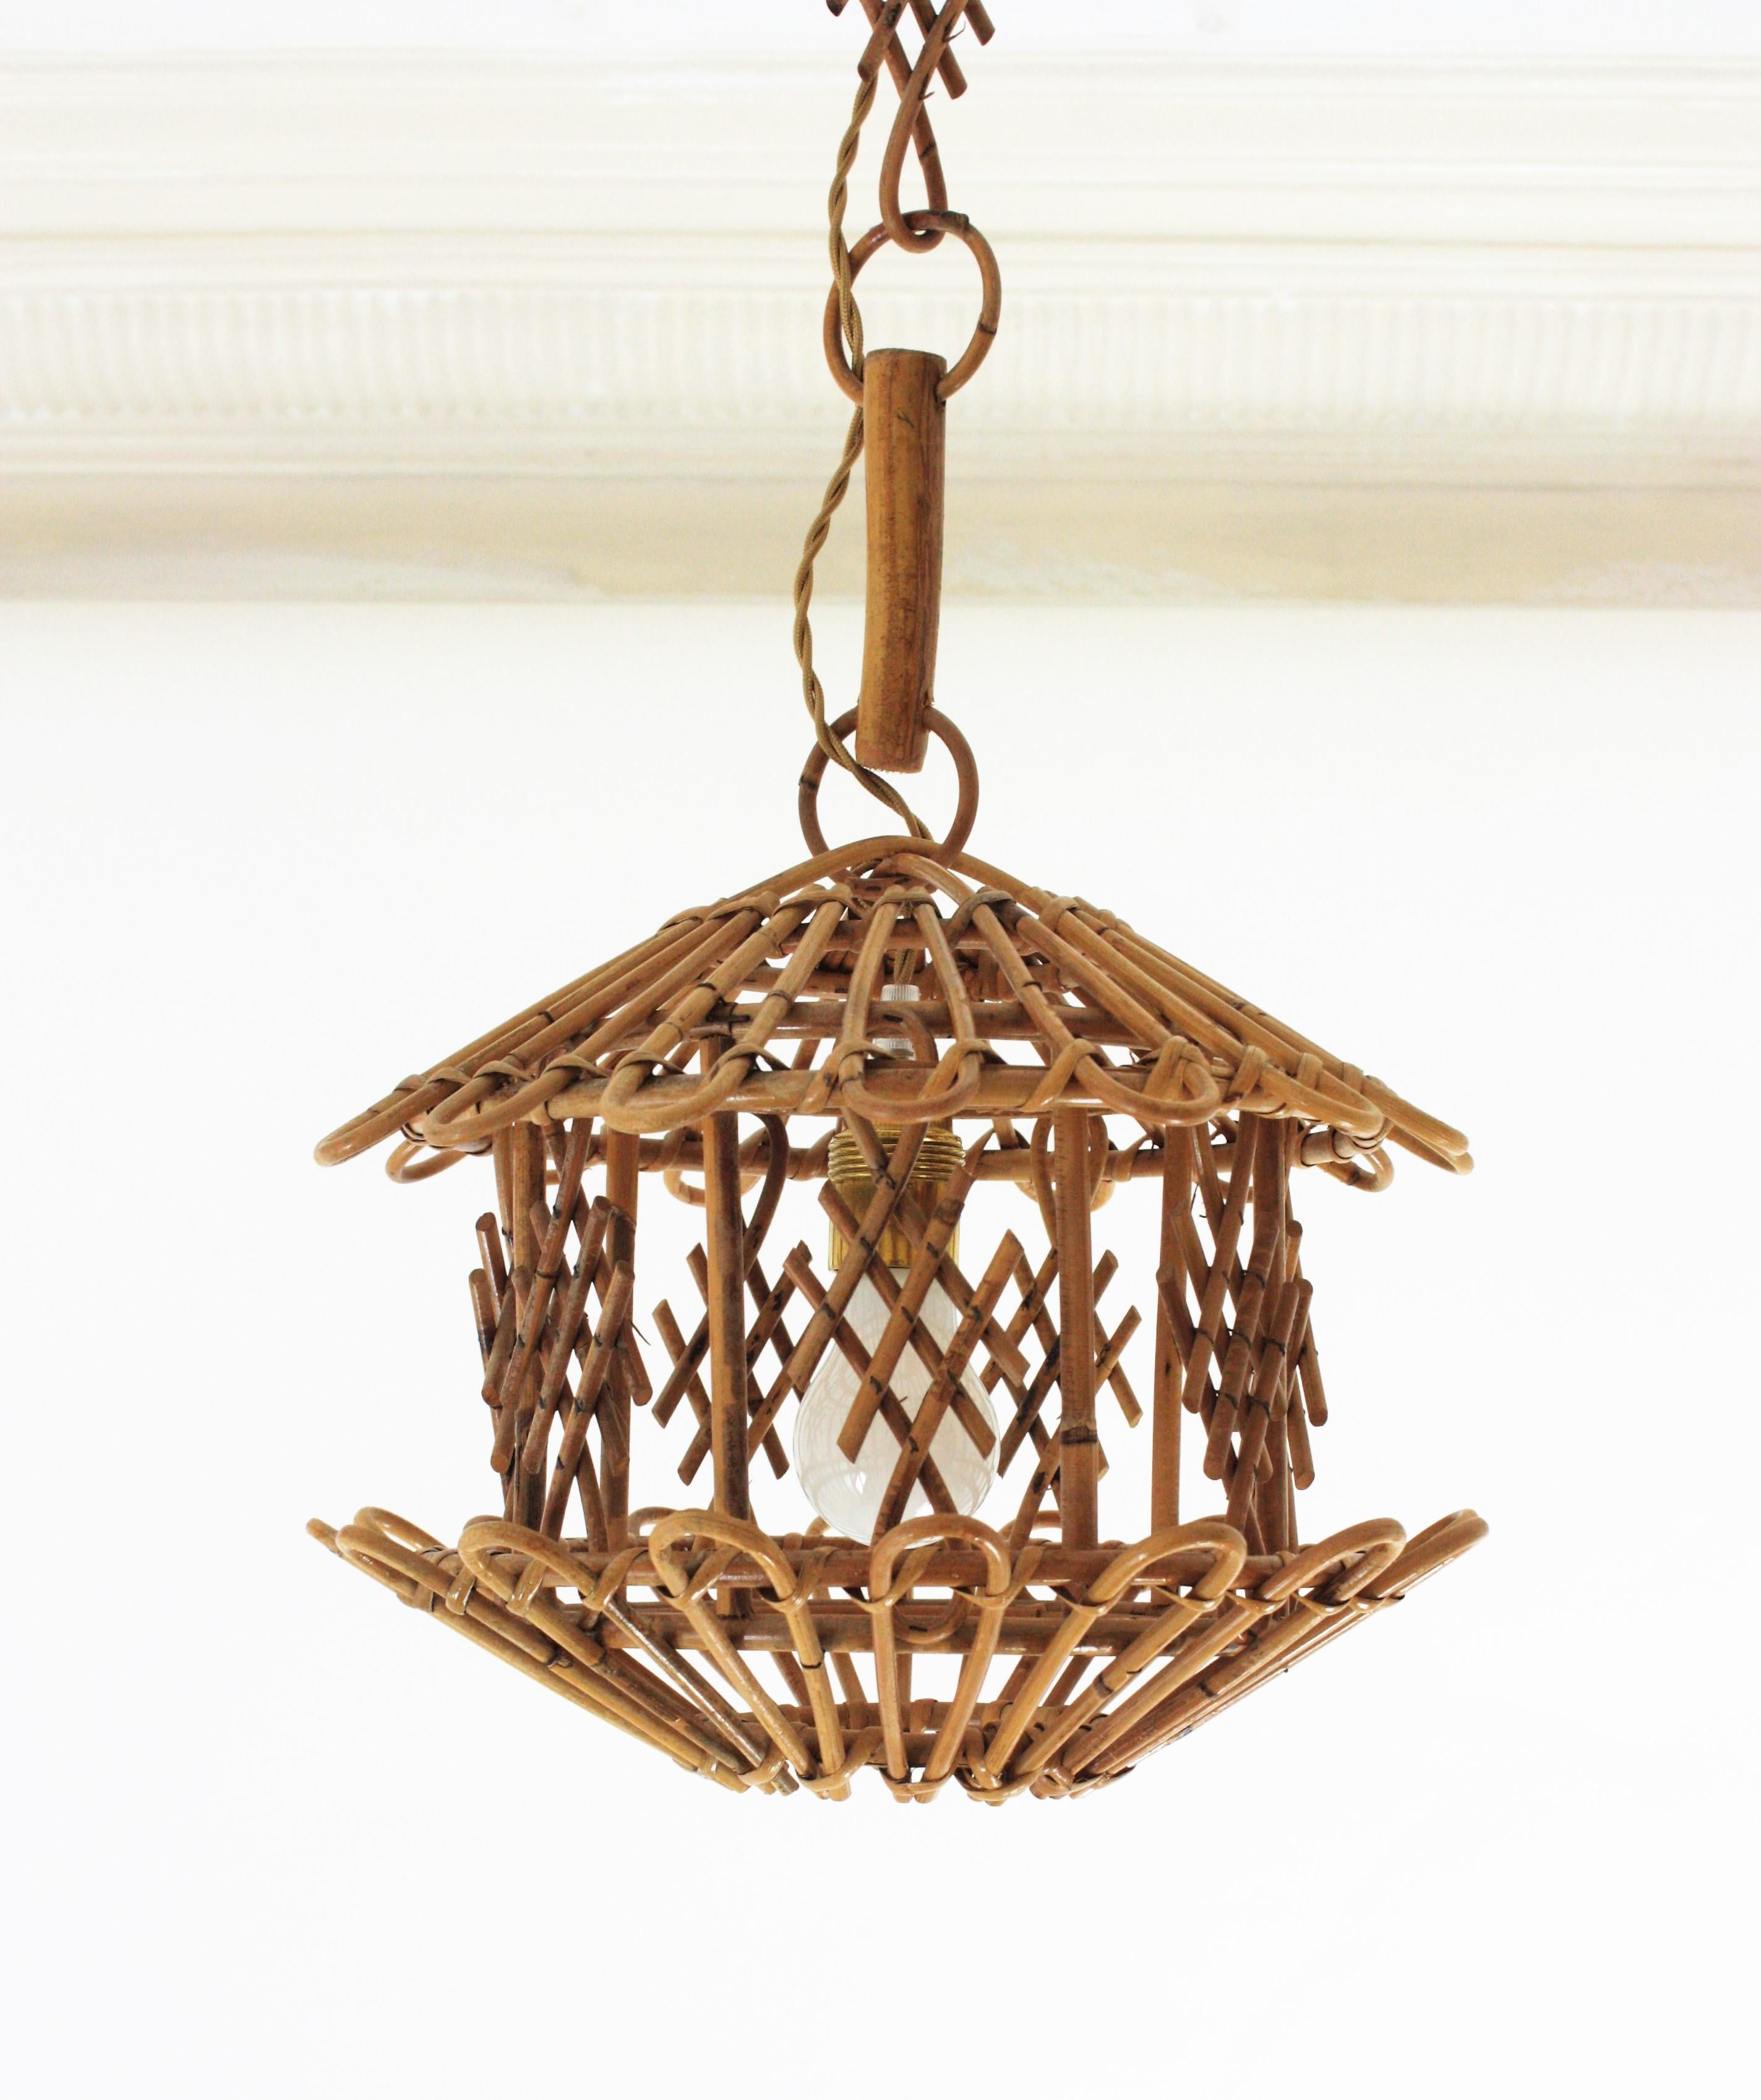 Pagoda suspension lamp, rattan, bamboo, France, 1960s.
Mid-Century Modern bamboo and rattan oriental inspired pagoda shaped pendant or hanging lamp. 
This handcrafted ceiling lamp features a pagoda shaped lantern with chinoiserie decorations. It